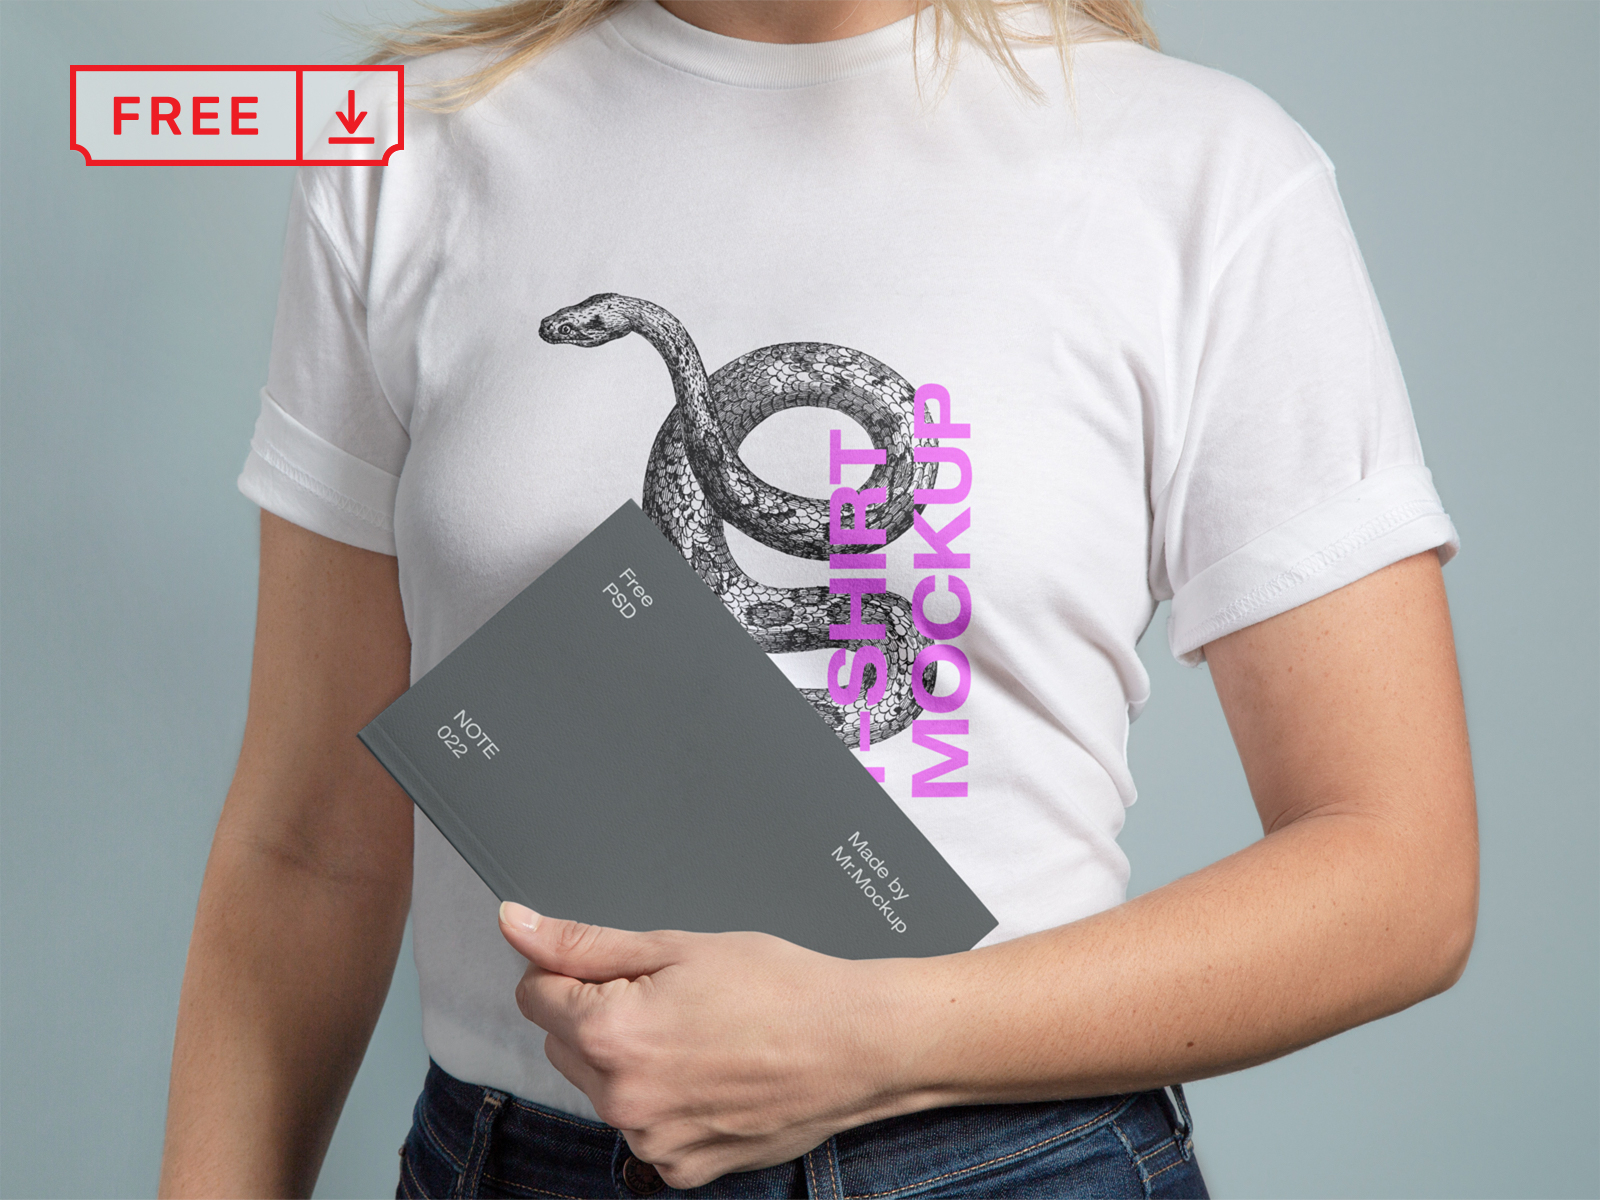 Download Free T Shirt with Notebook Mockup by Mr.Mockup™ on Dribbble